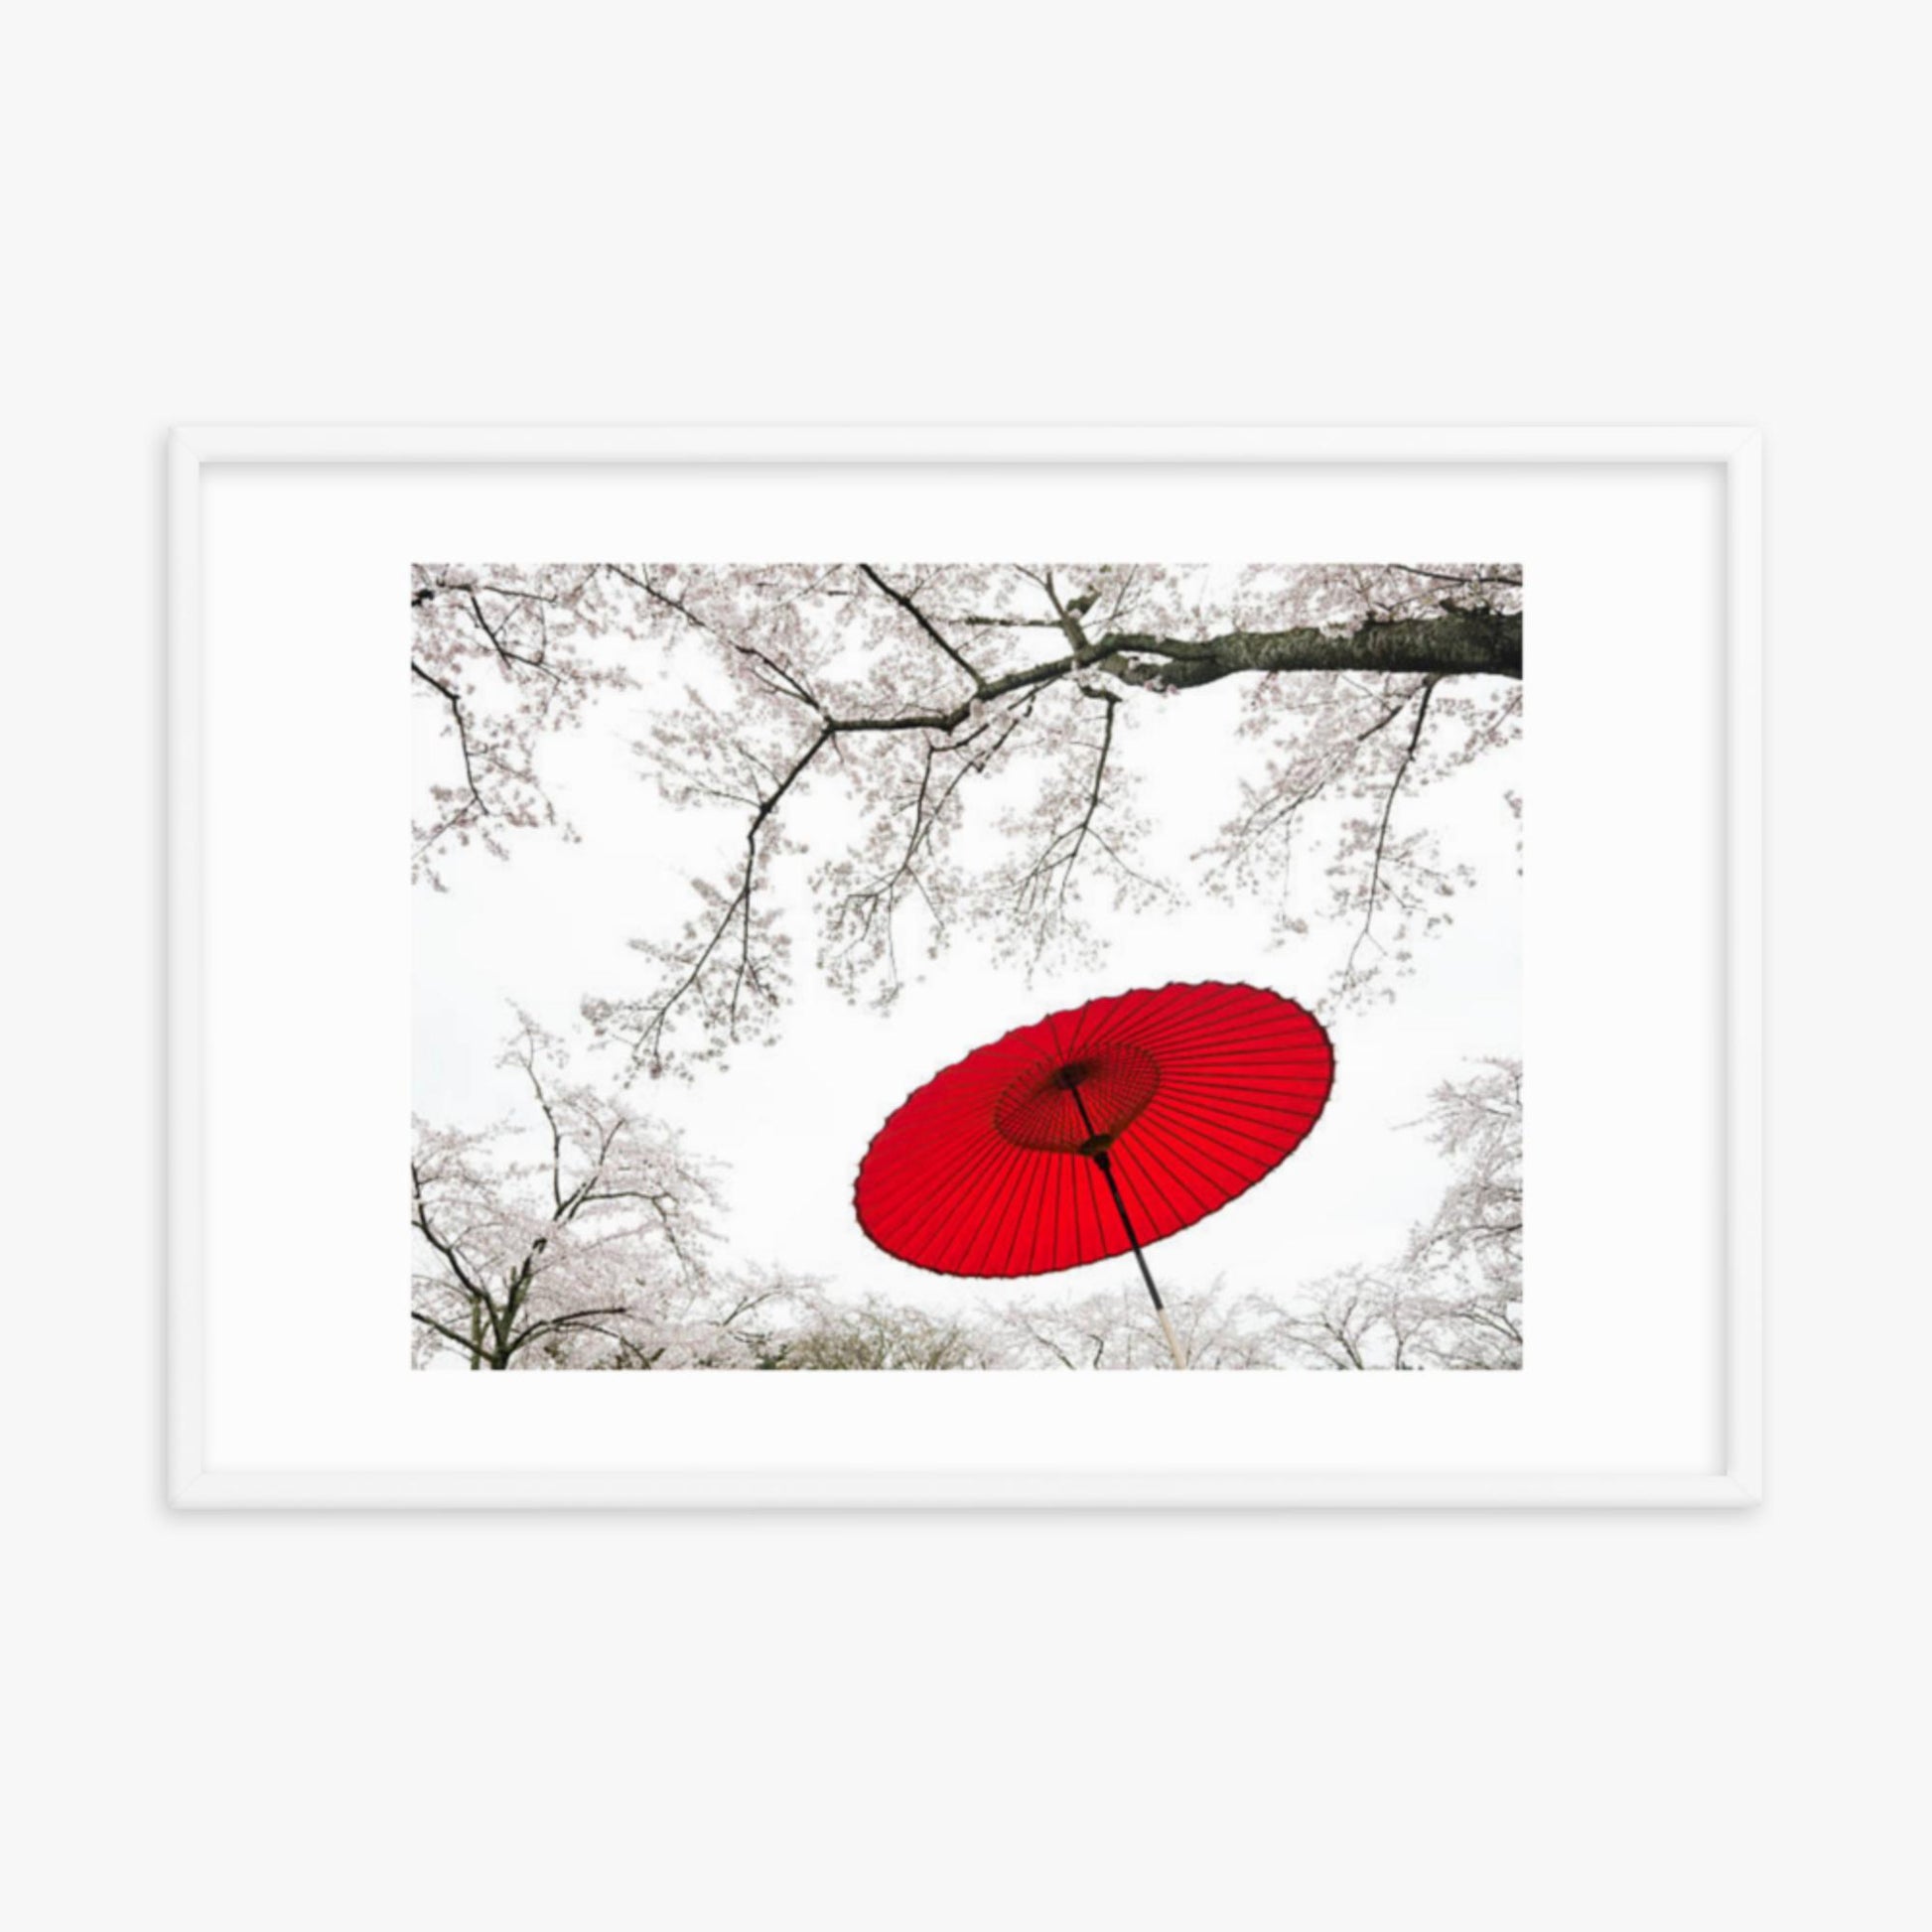 Japanese Umbrella 24x36 in Poster With White Frame